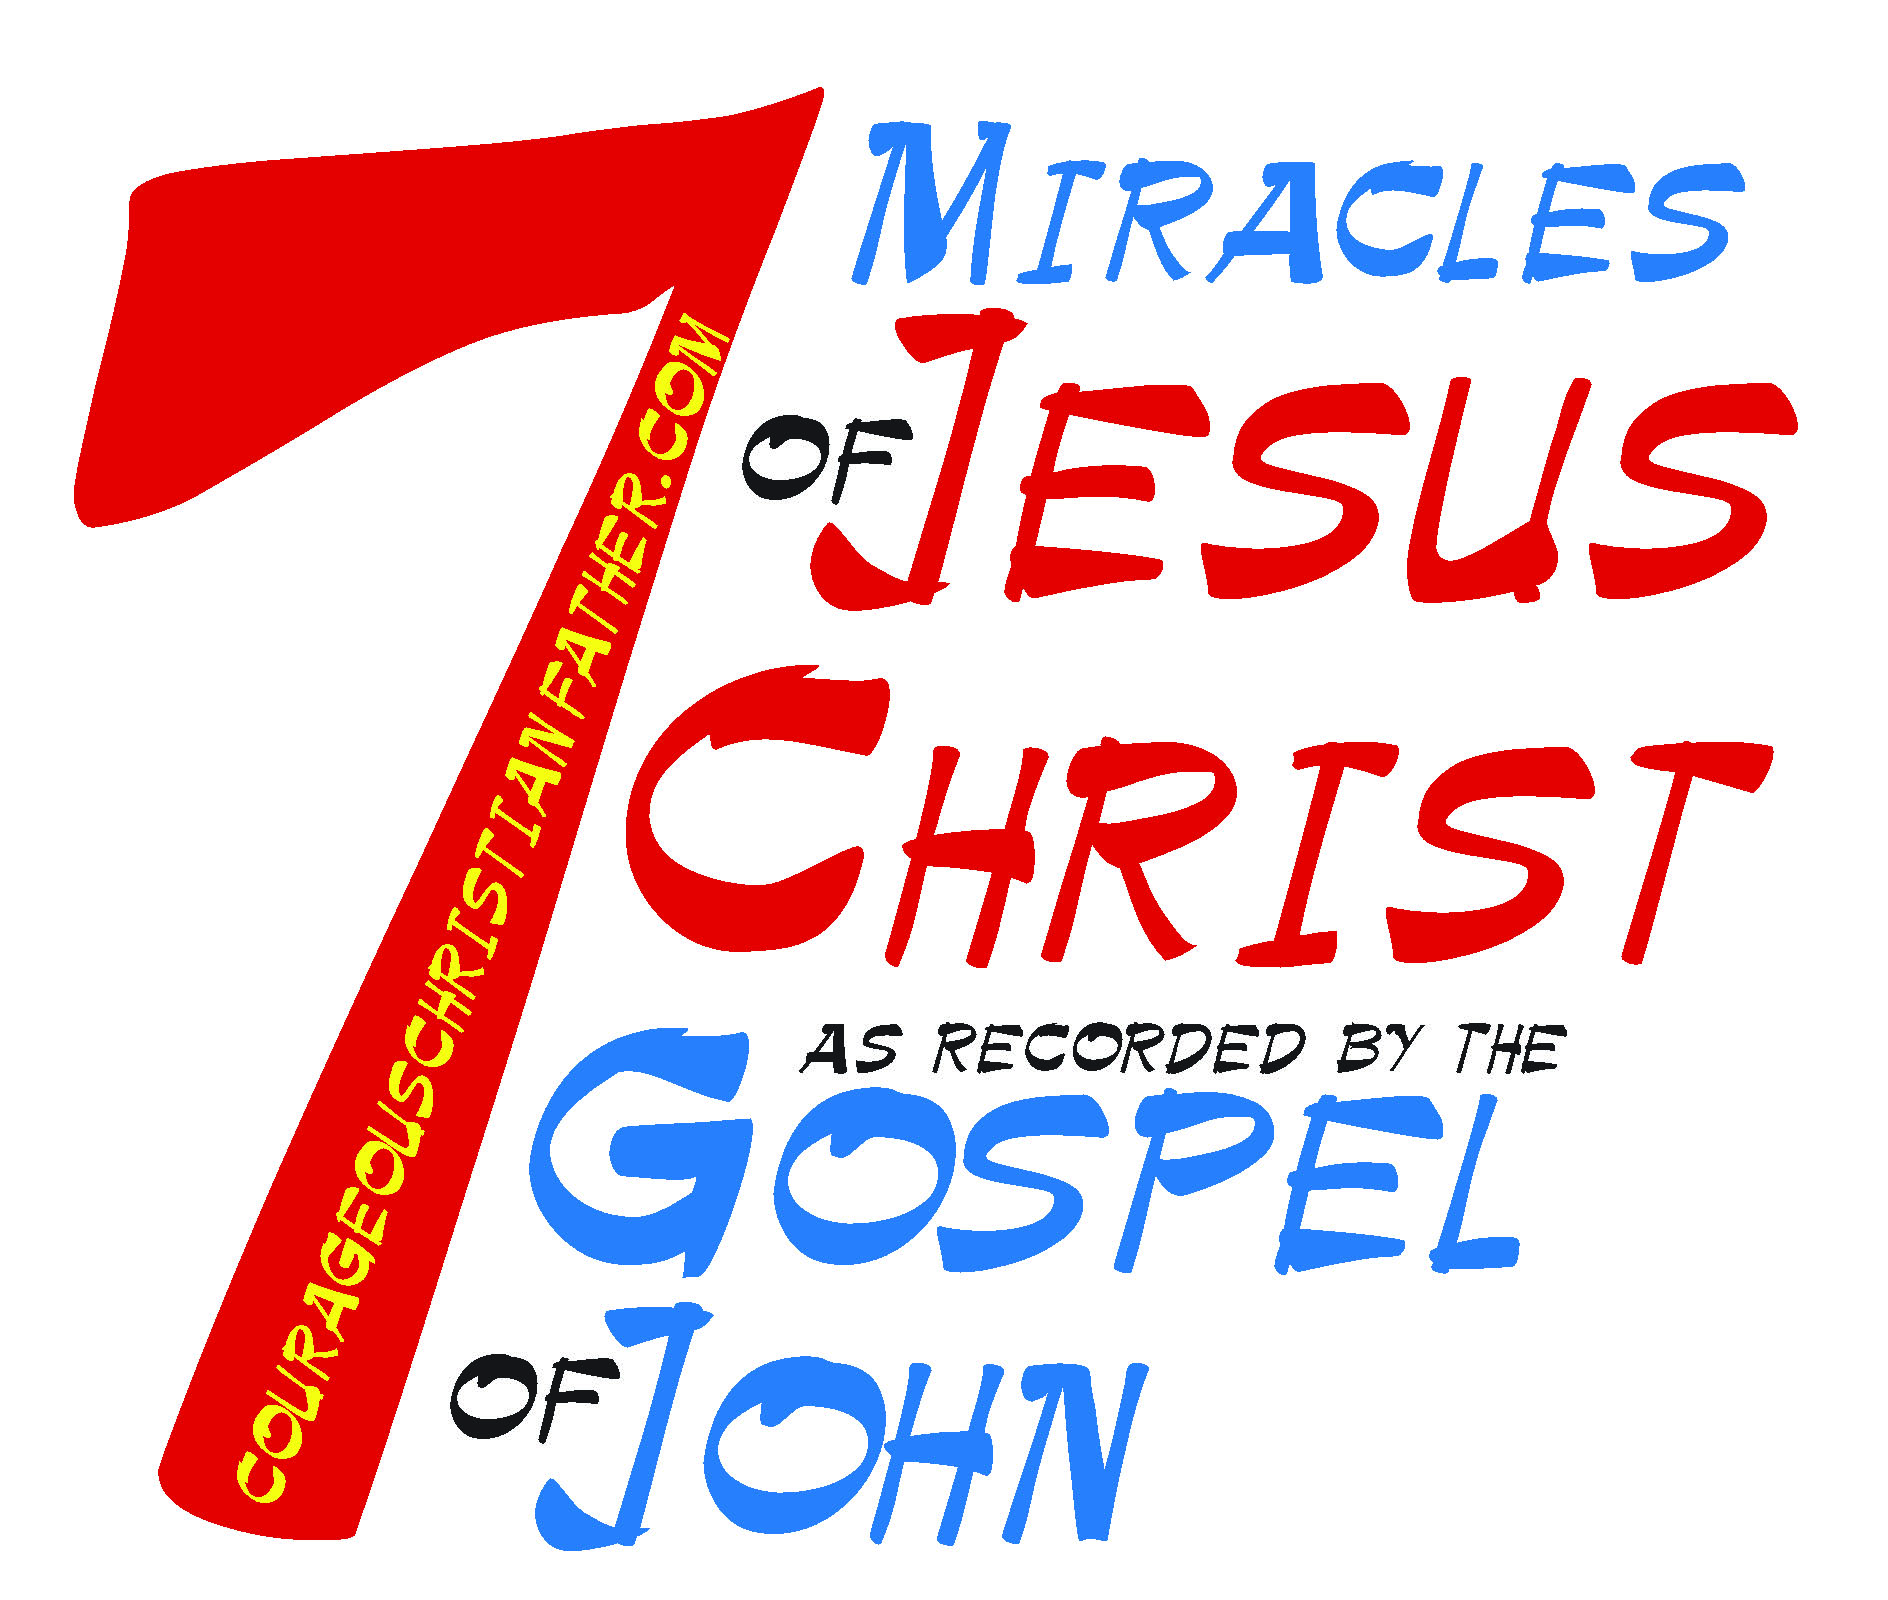 7 Miracles of Jesus Christ as recorded by the Gospel of John